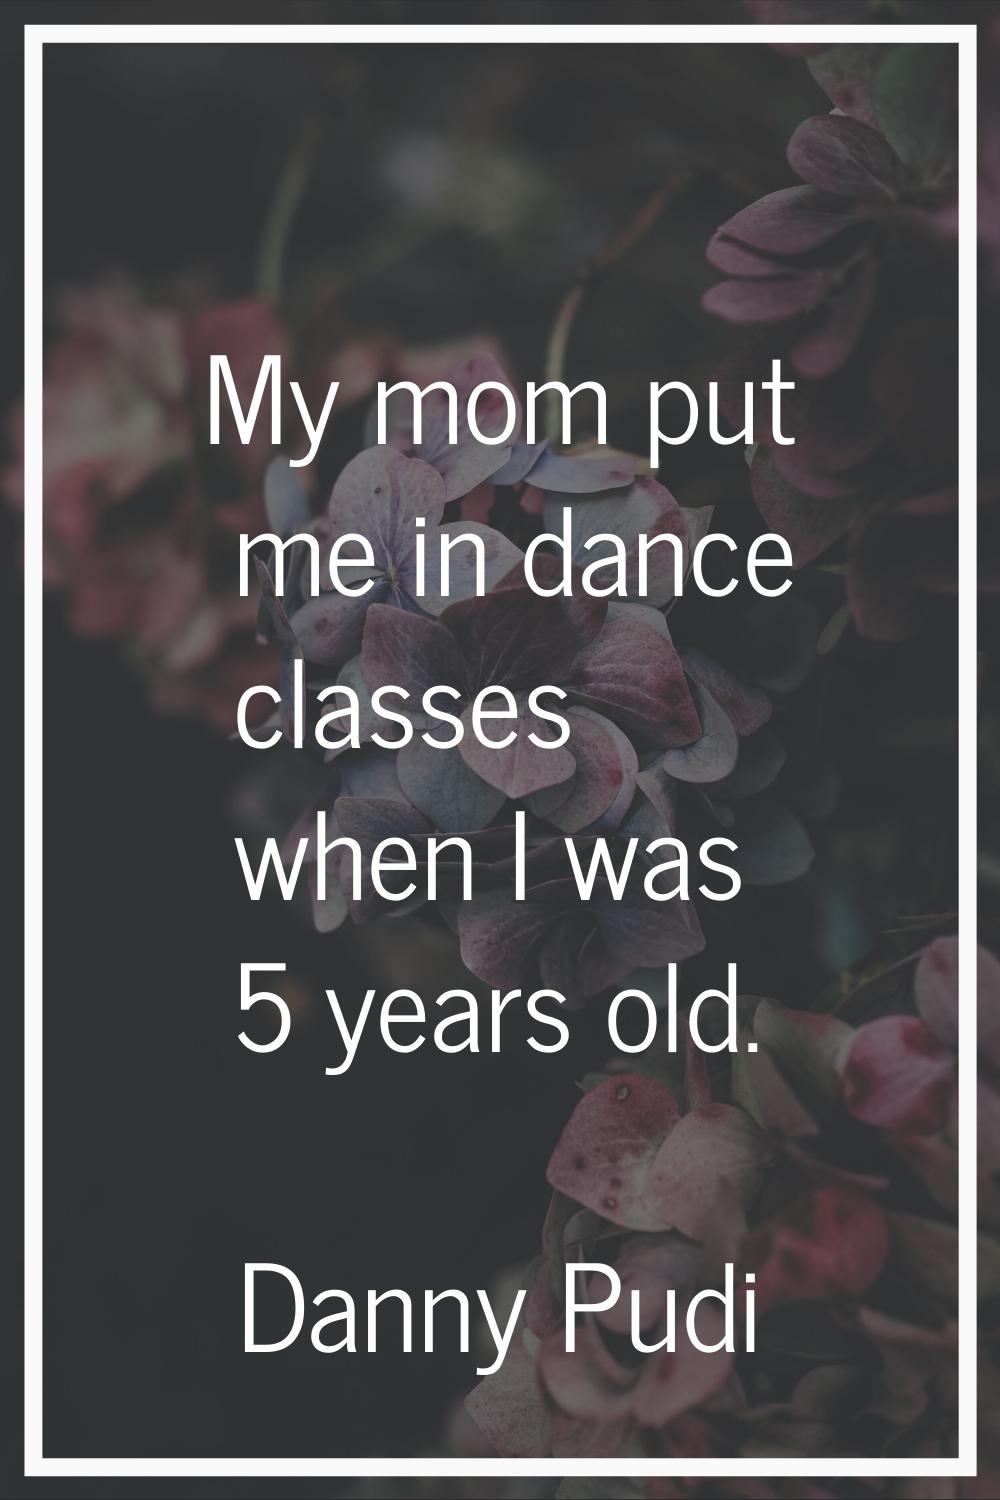 My mom put me in dance classes when I was 5 years old.